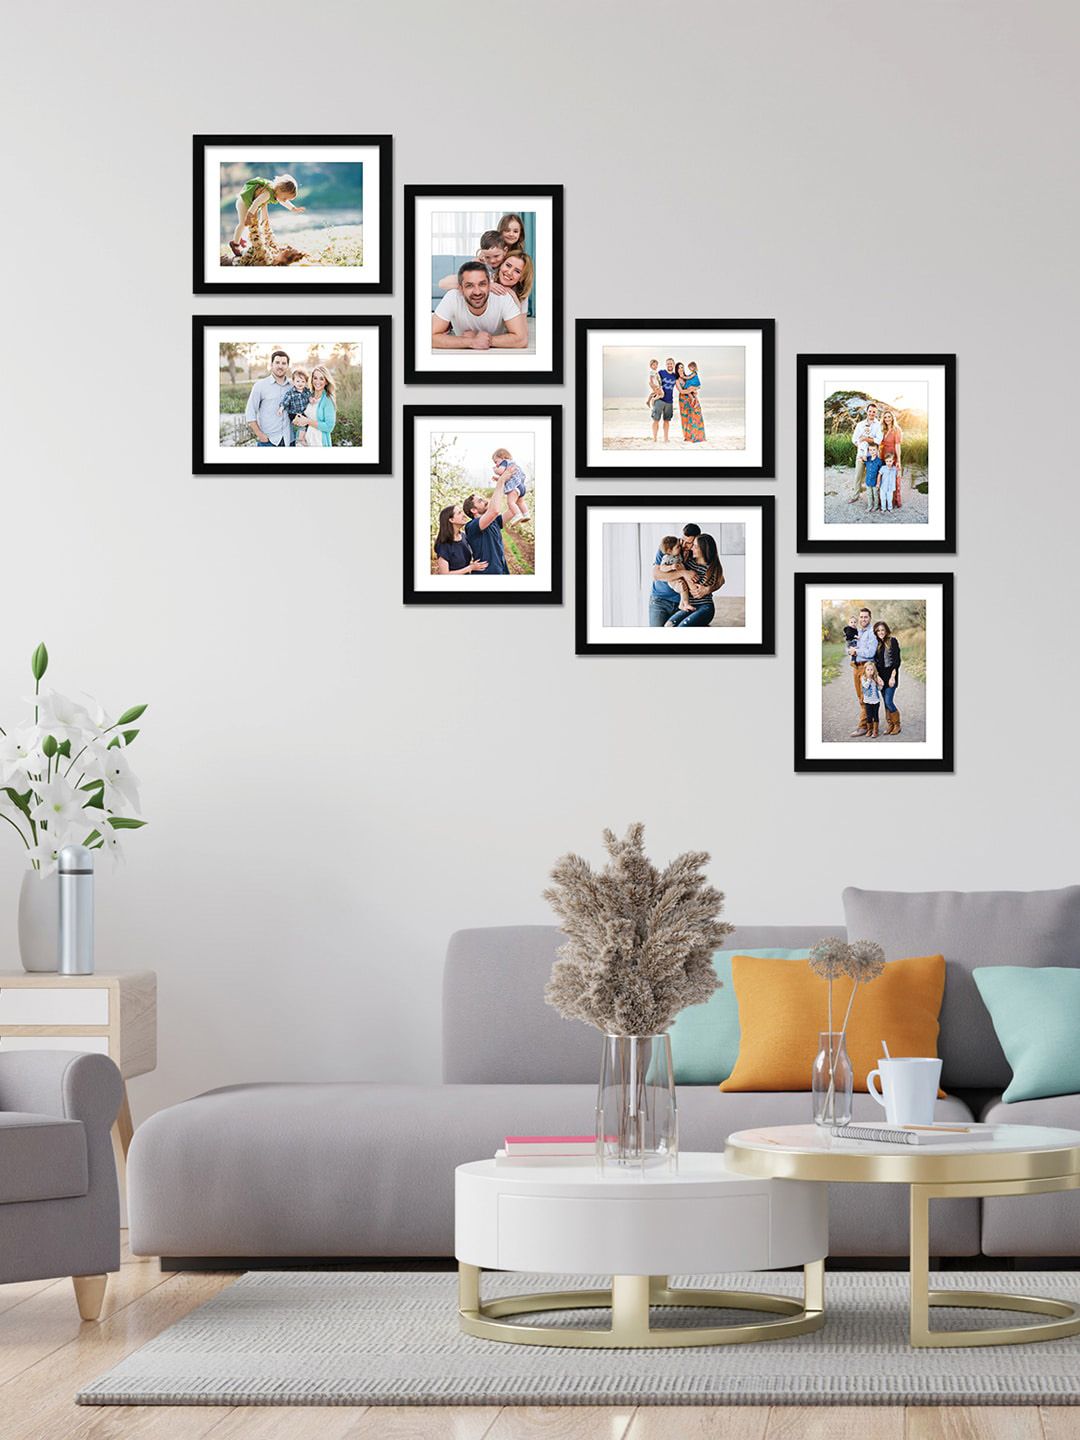 RANDOM Set Of 8 Black Solid Rectangle Wall Photo Frames Price in India